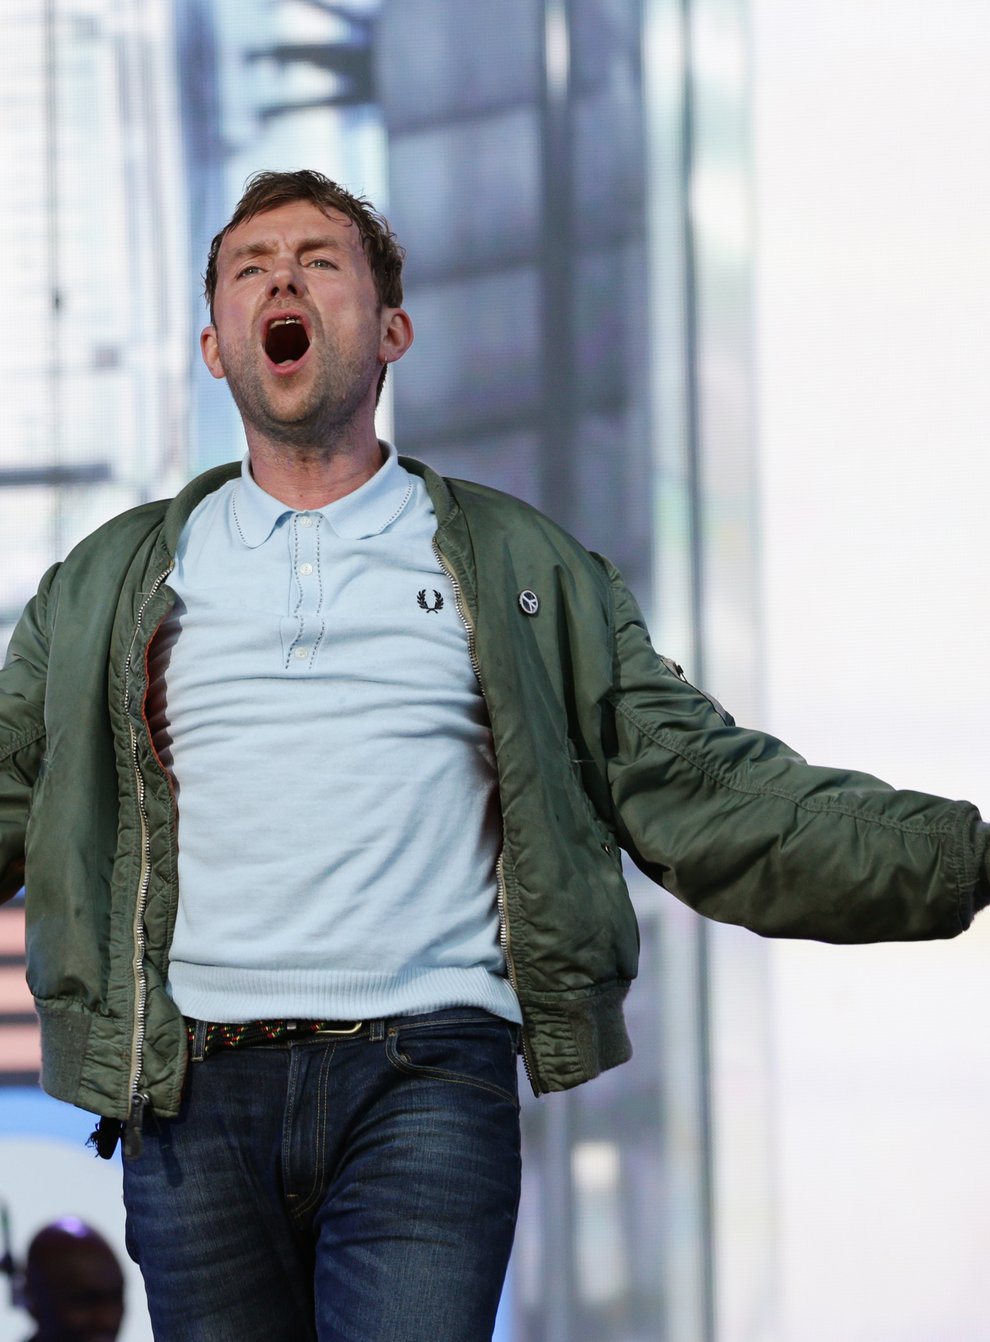 Blur have not been on tour together since 2015